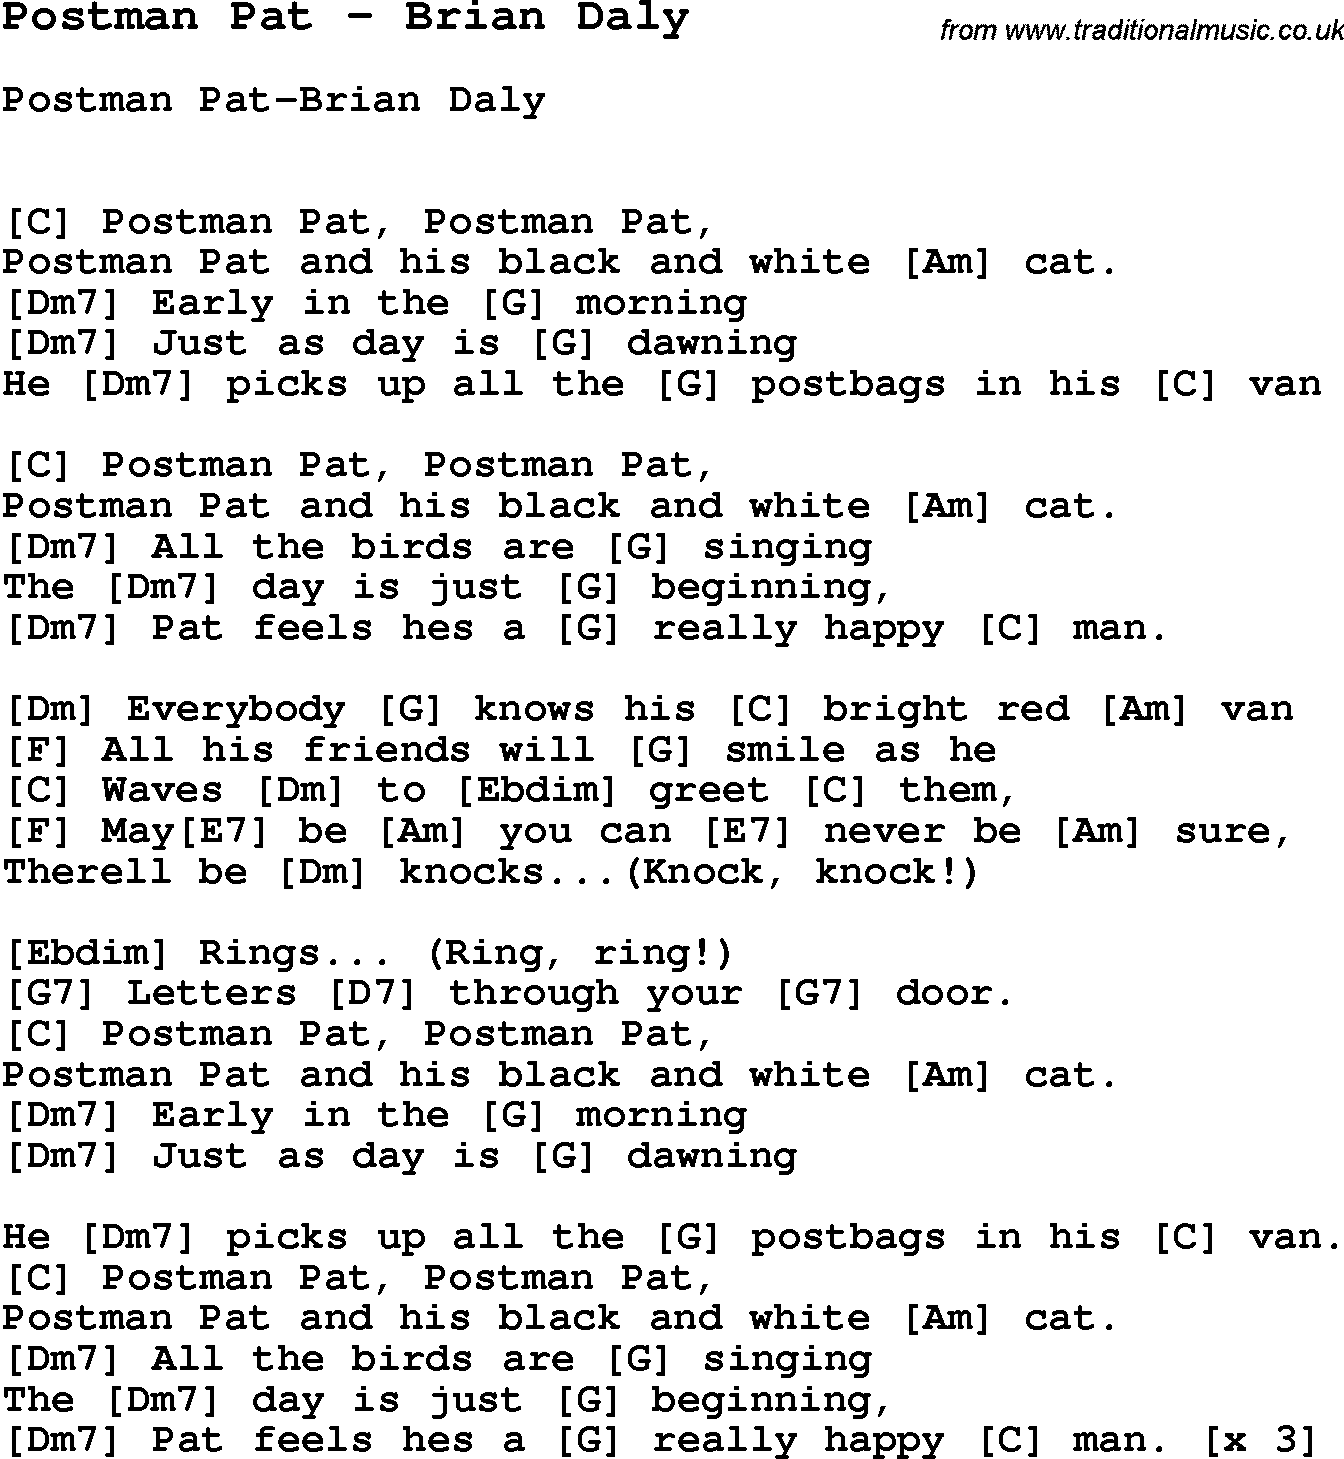 Song Postman Pat by Brian Daly, with lyrics for vocal performance and accompaniment chords for Ukulele, Guitar Banjo etc.